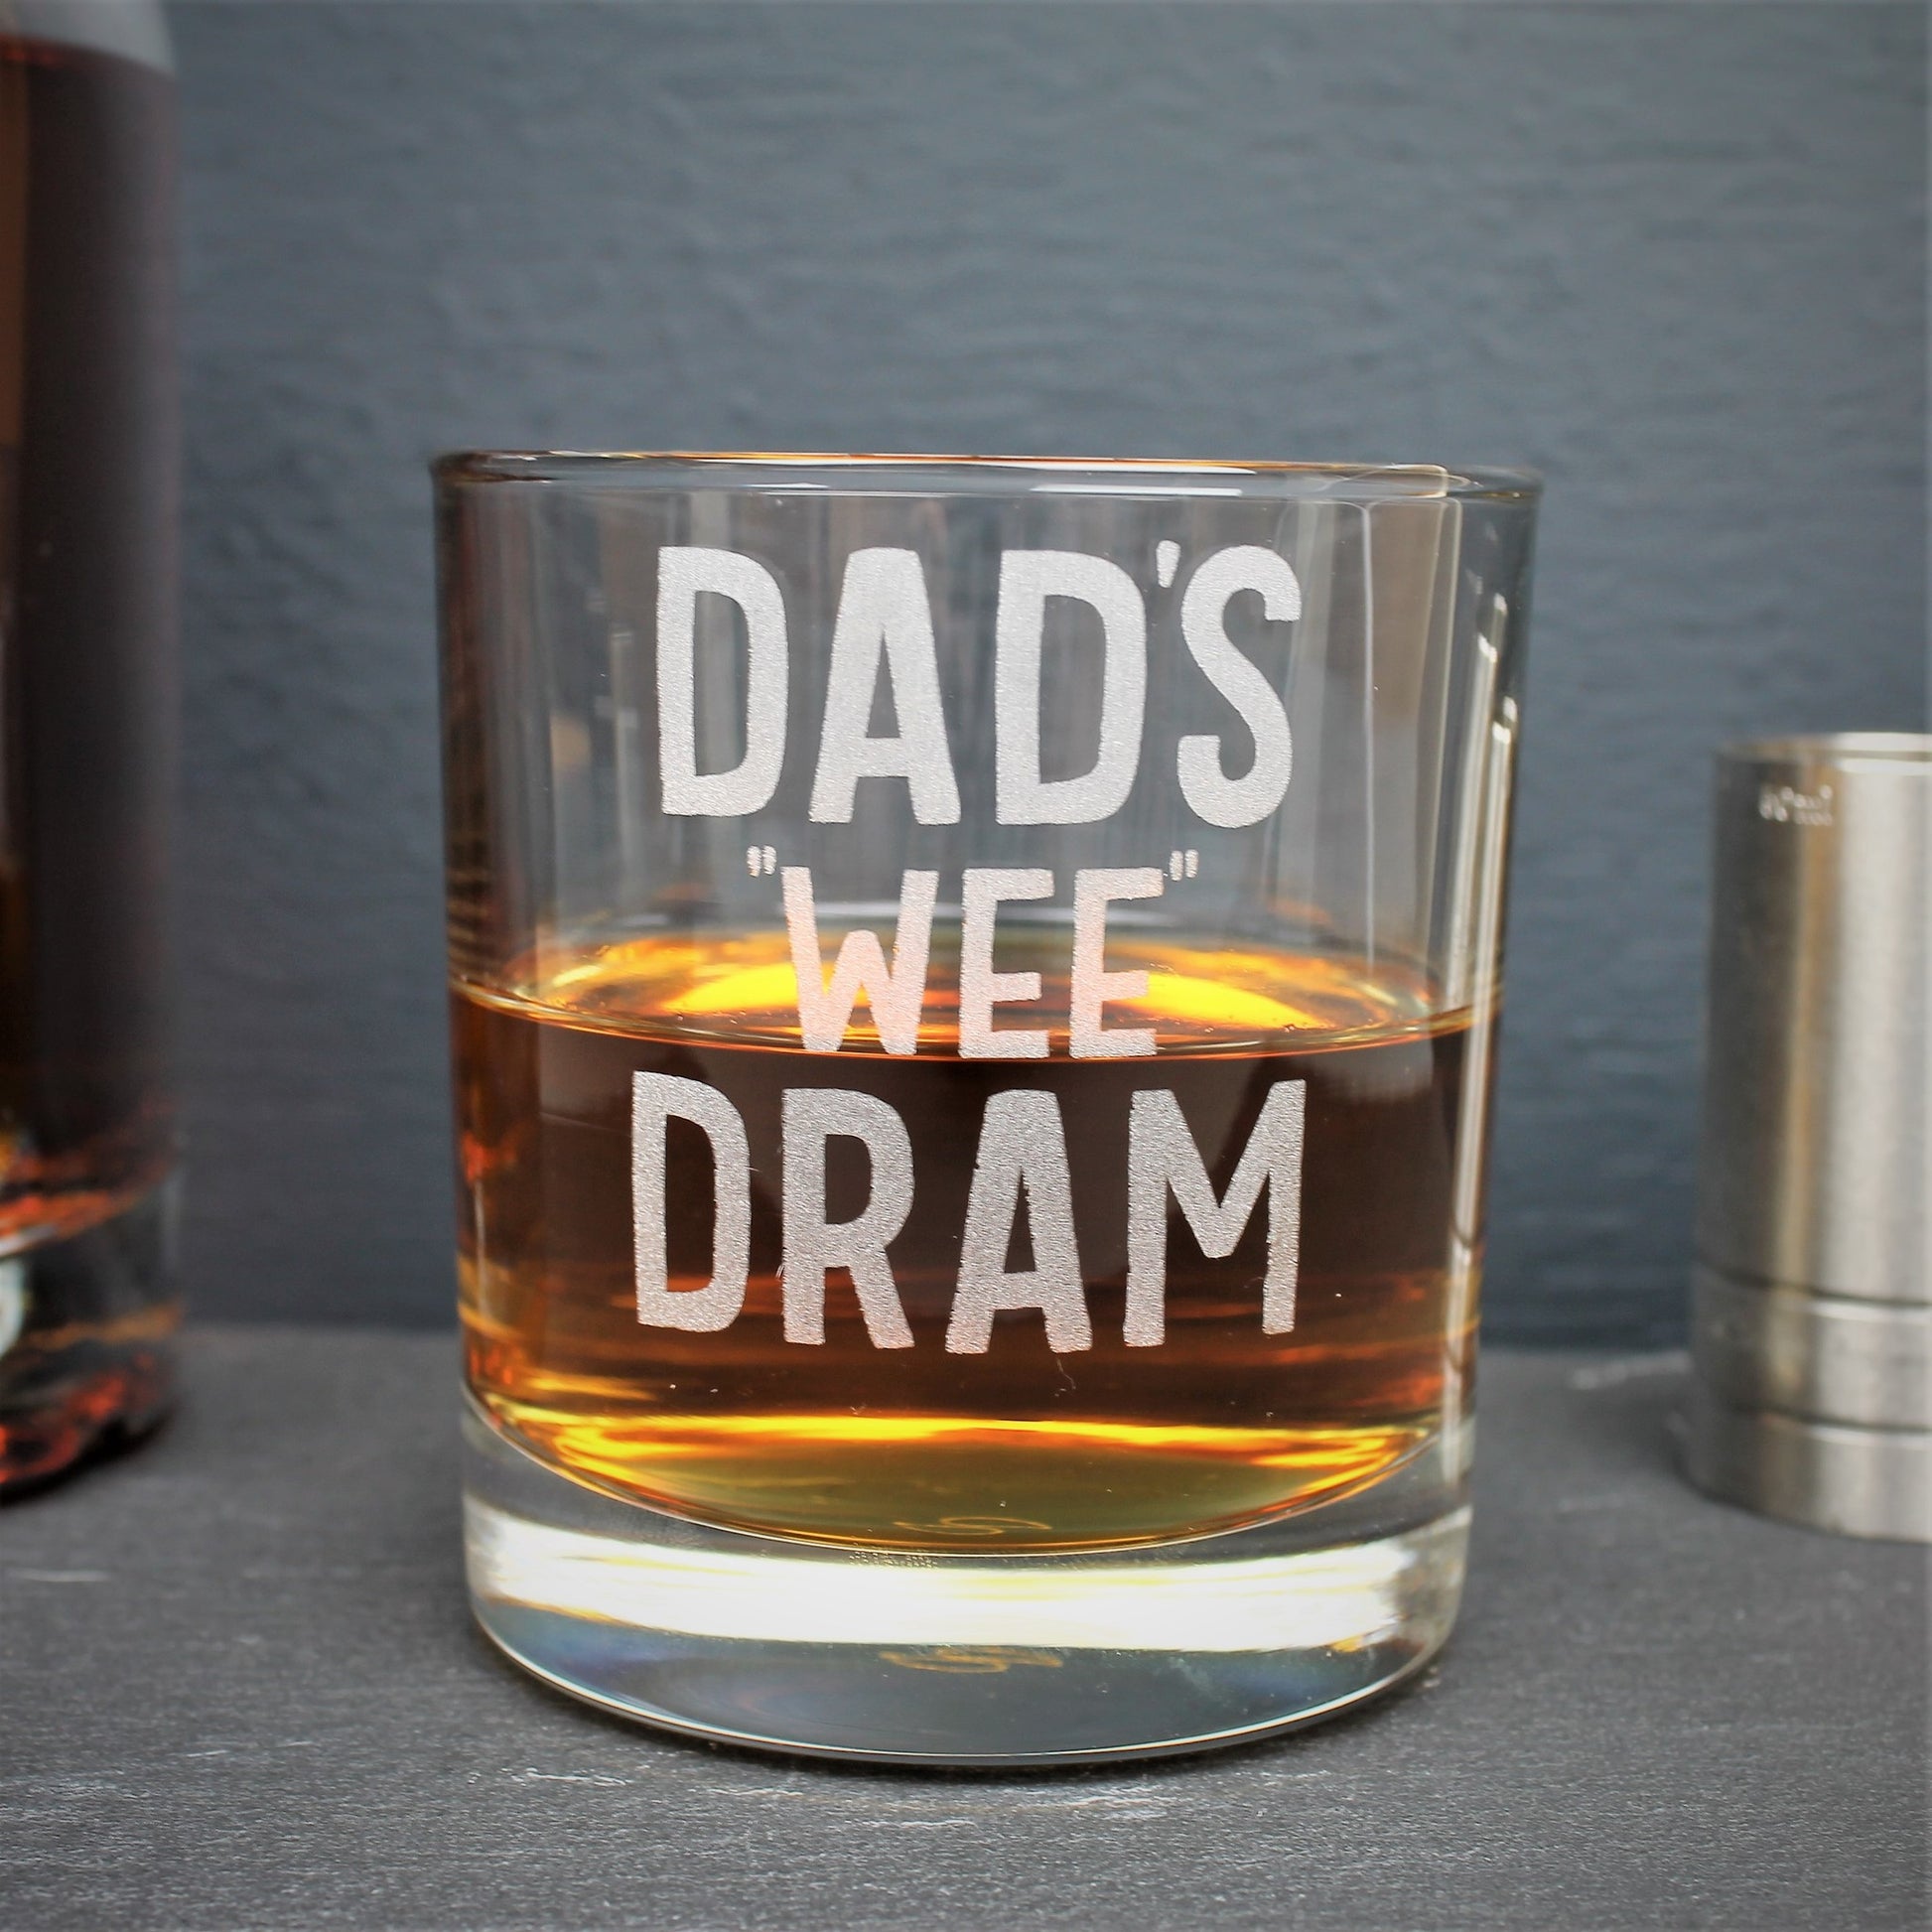 Engraved glass with Dad's wee dram, can also be personalised with own text